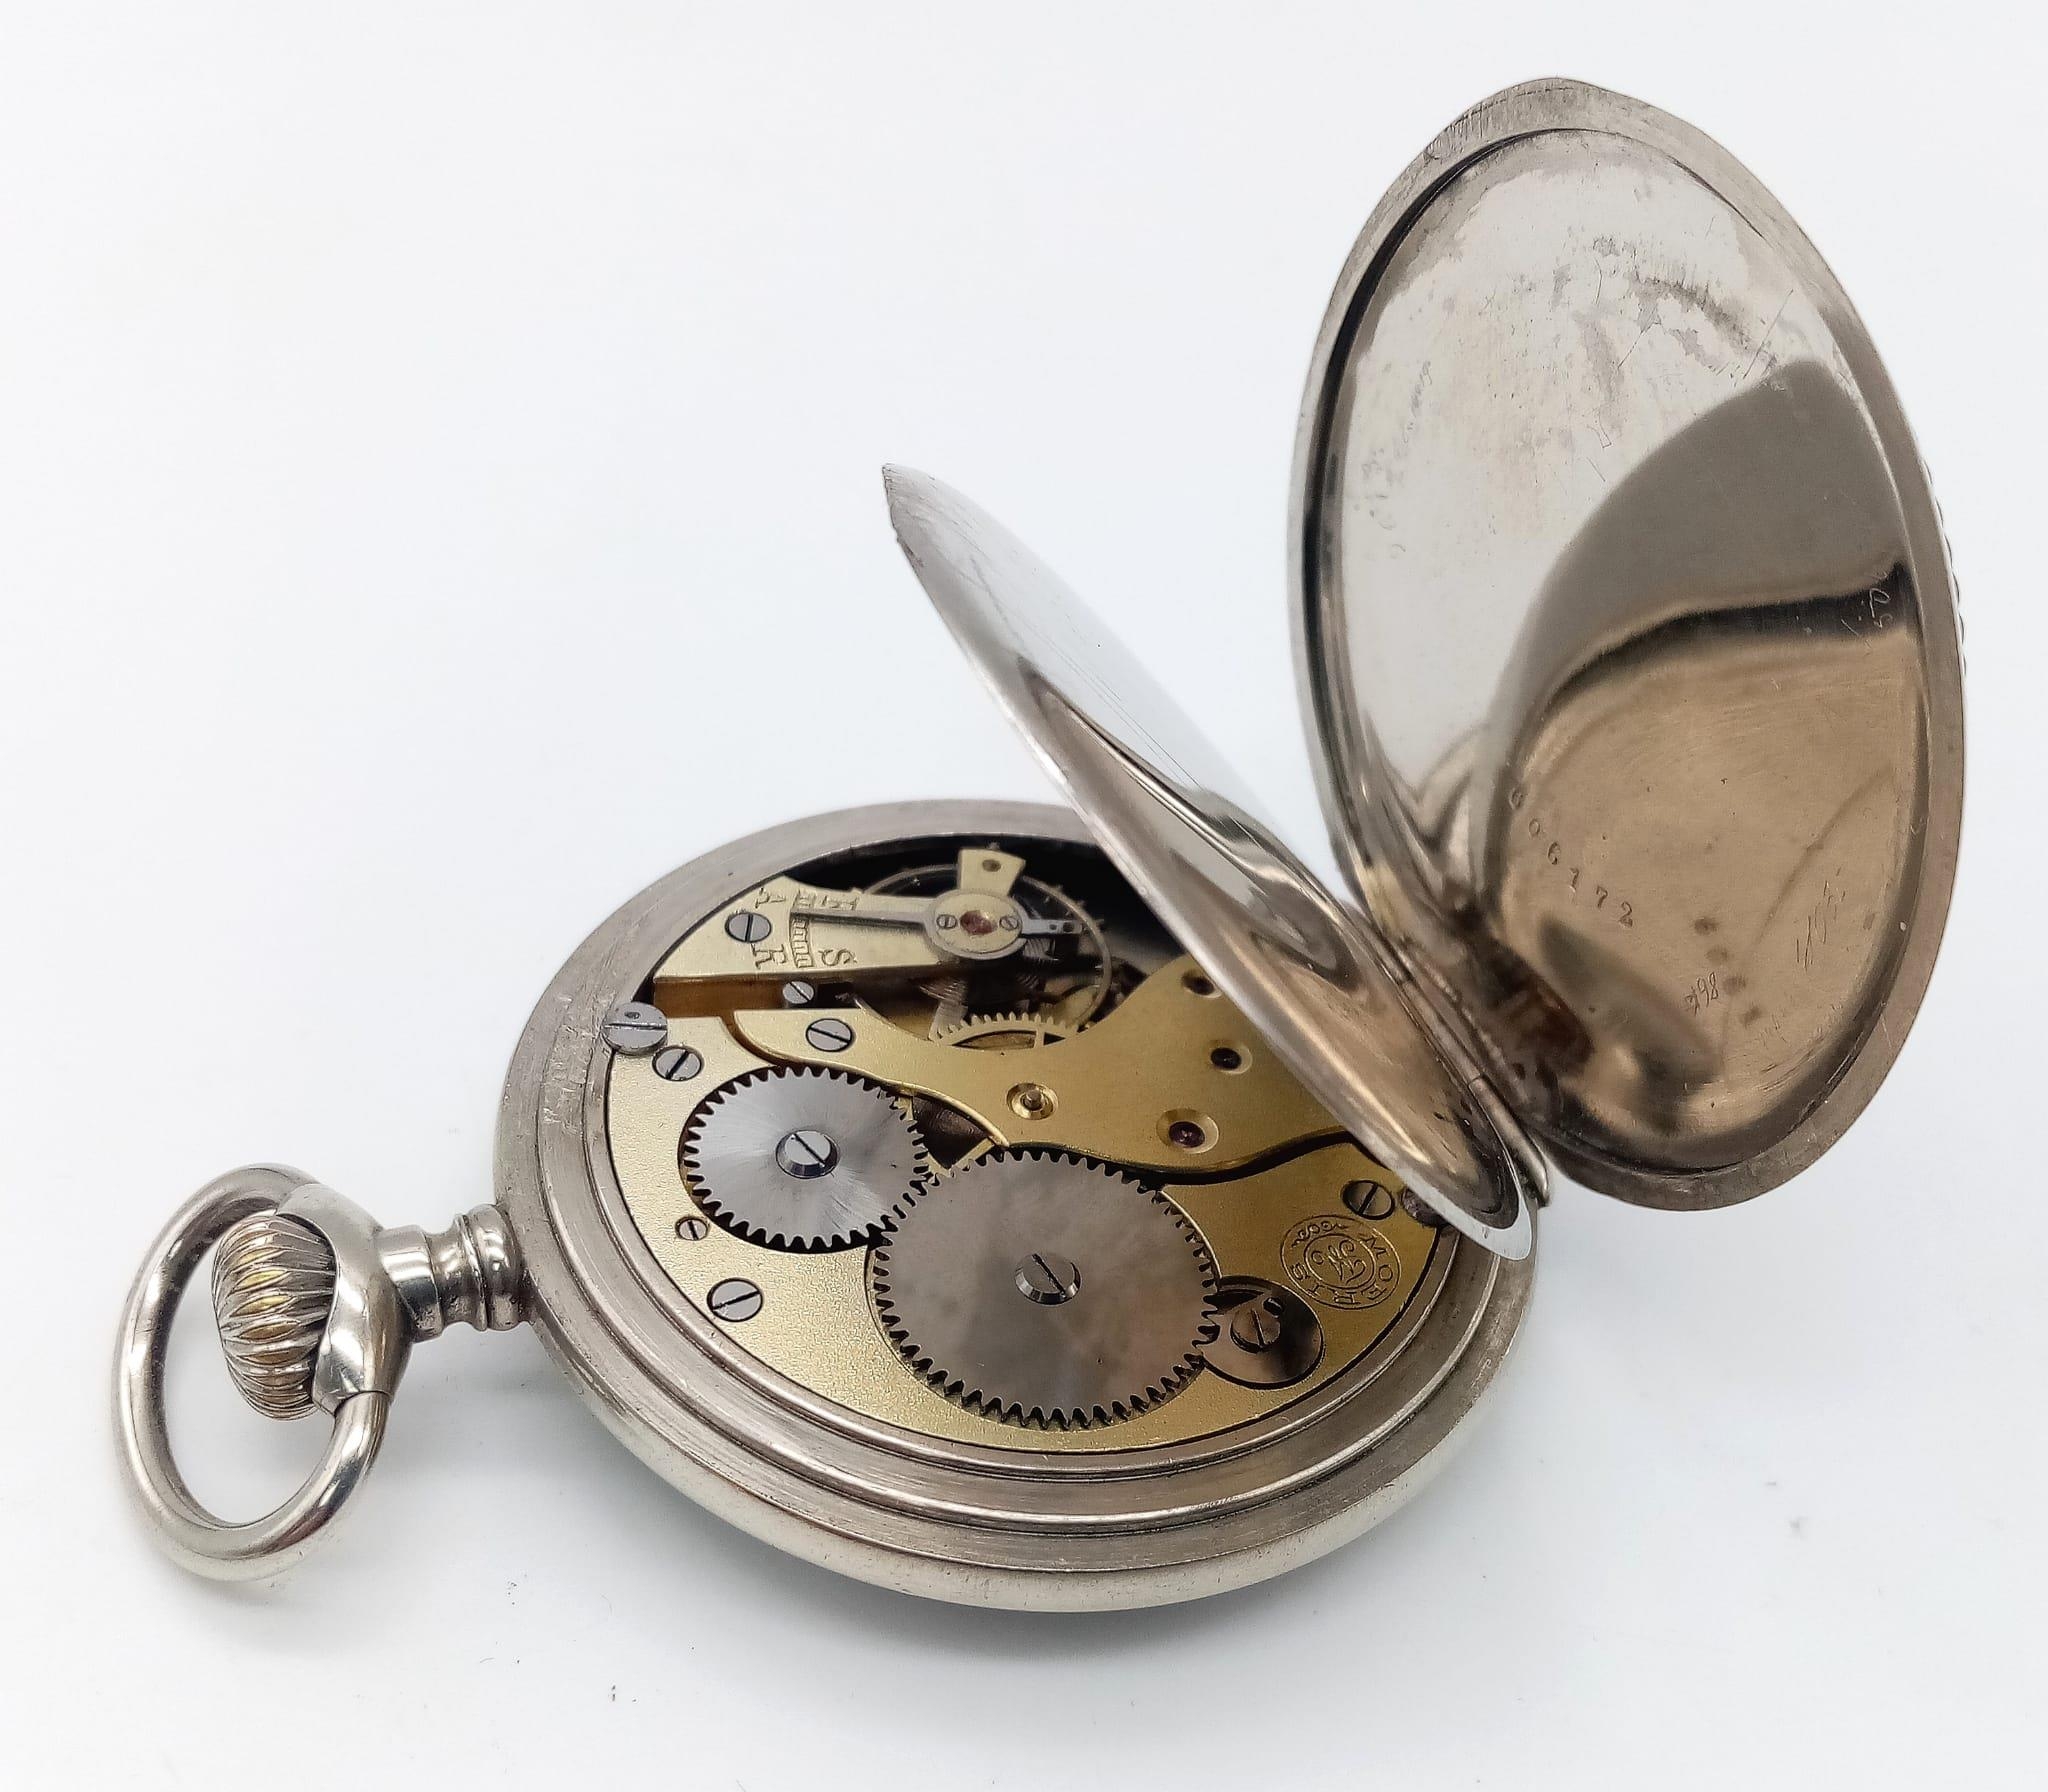 3rd Reich S.A Pocket Watch with Swiss movement by Moreis. Good working order. - Image 4 of 9